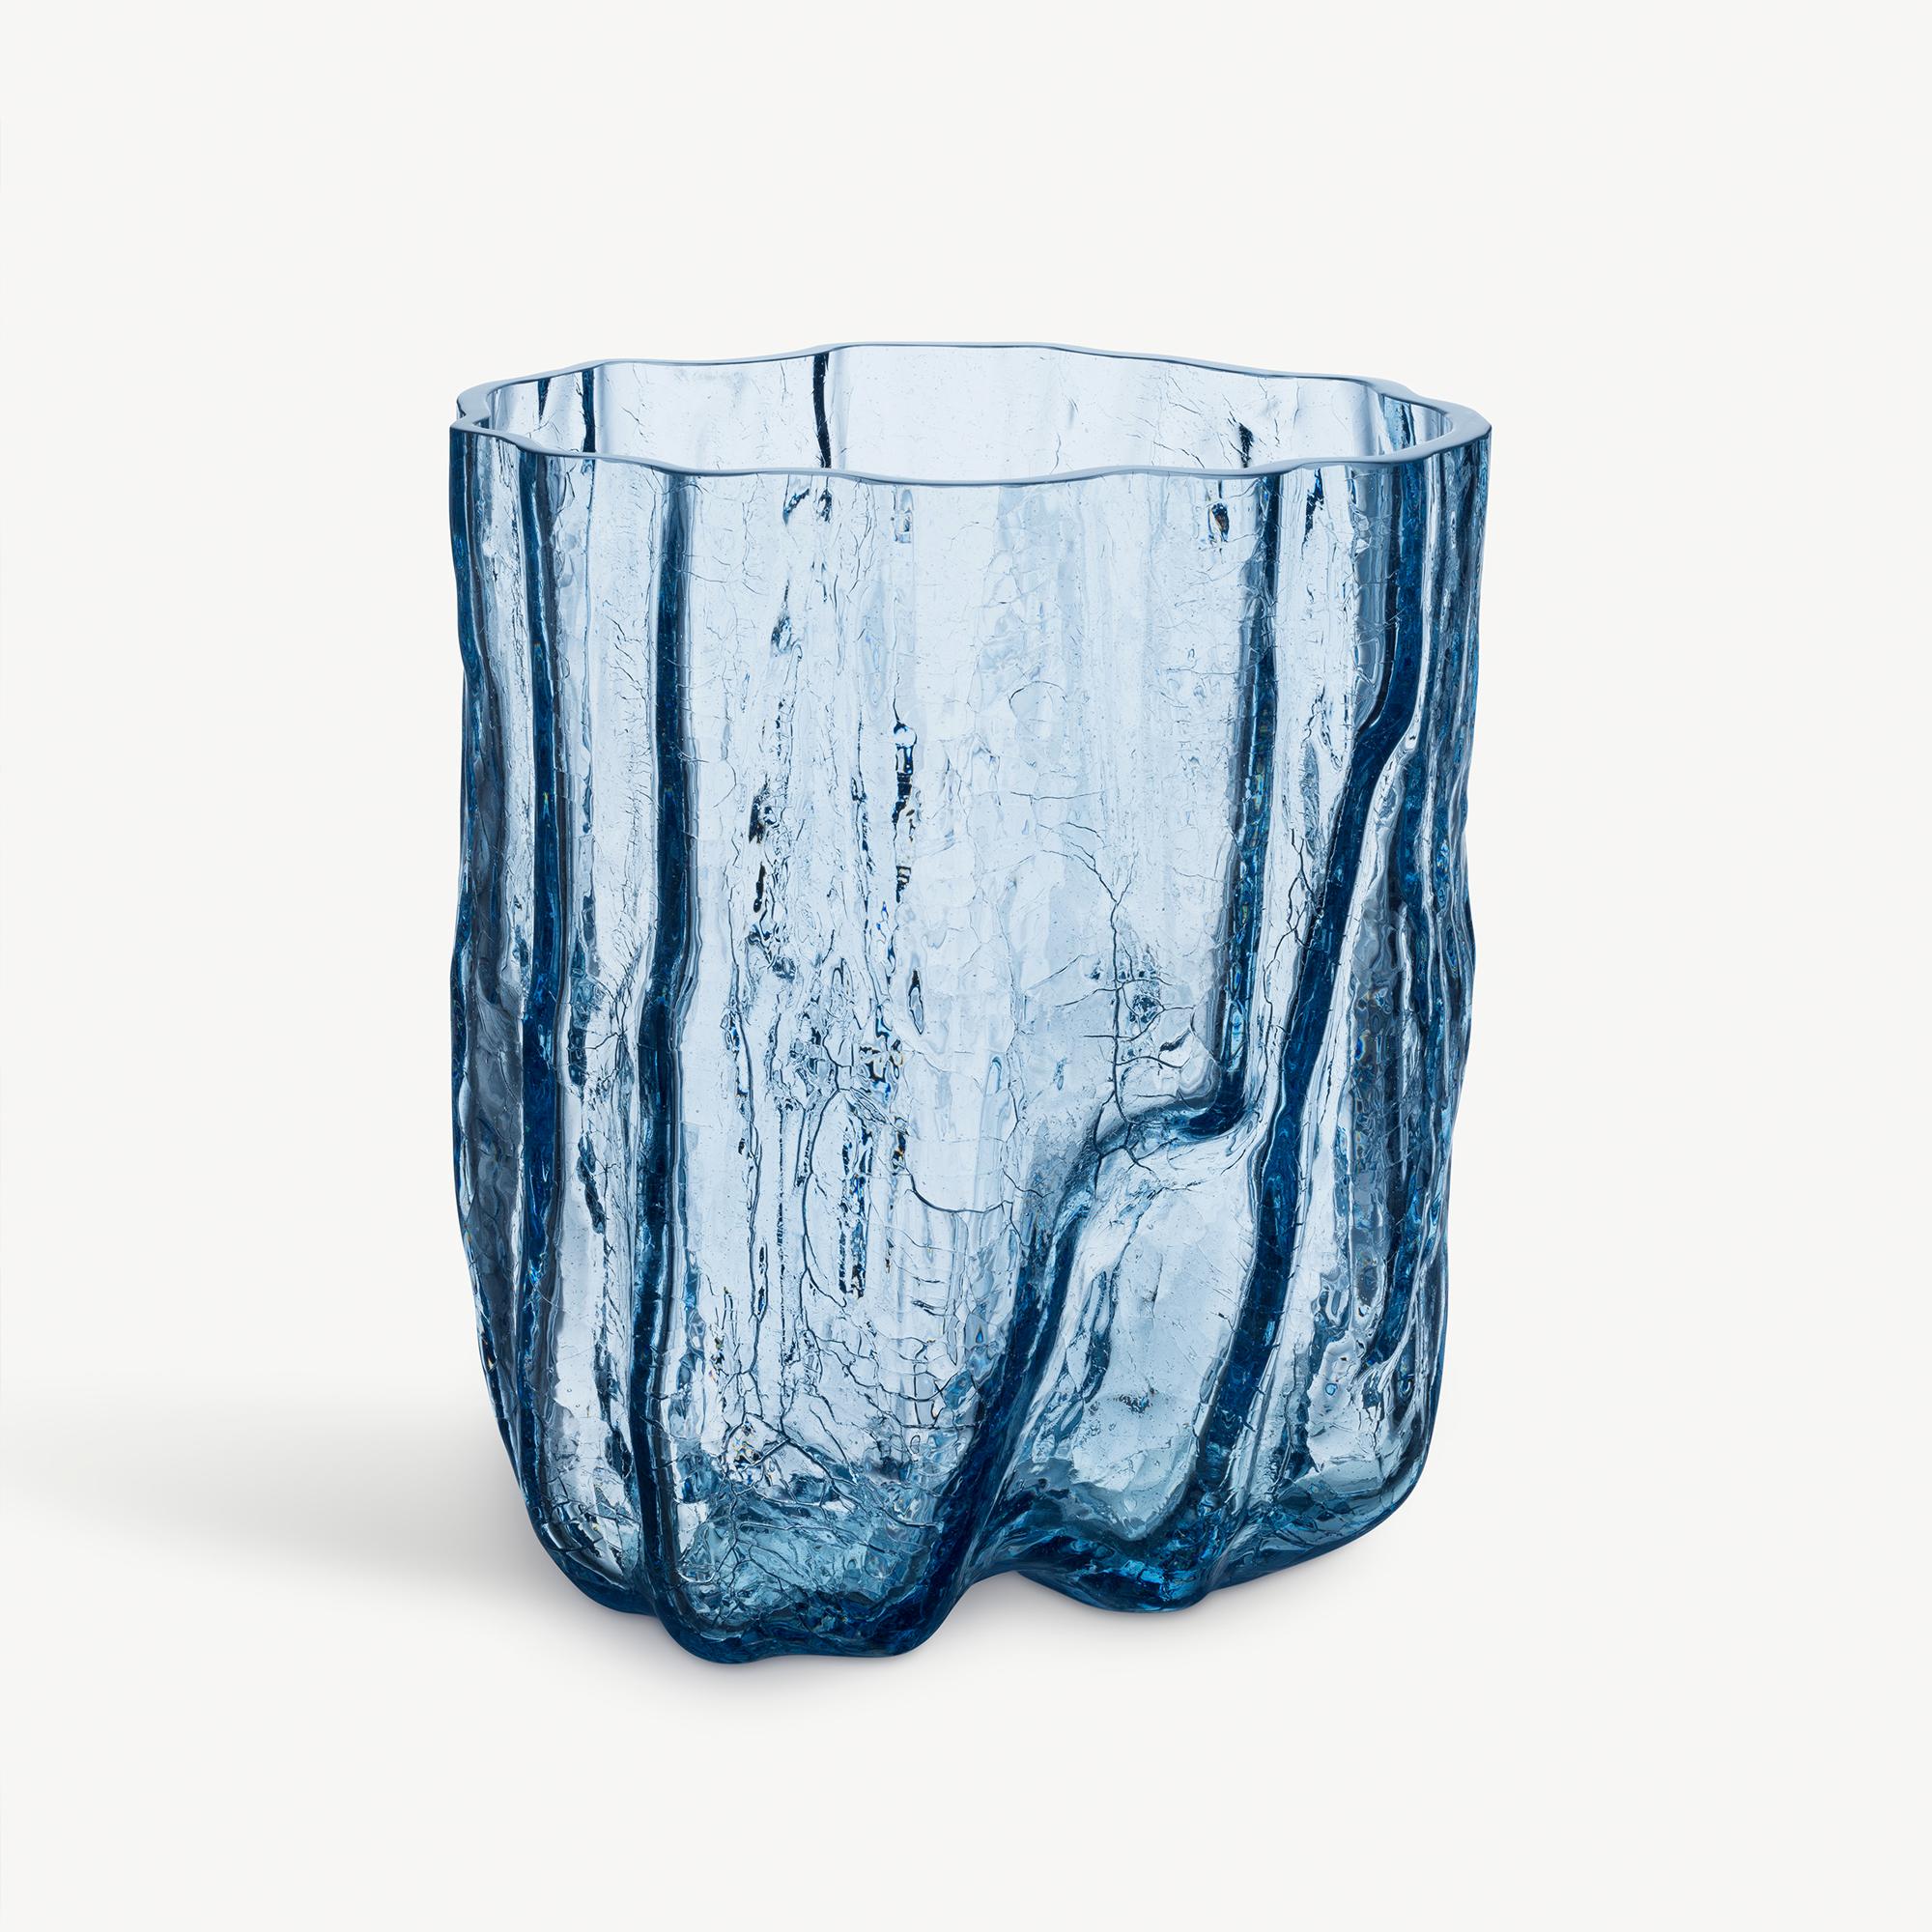 Crackle and thunder – a magical wonder! At Kosta Boda, we marvel at beautifully preserved cracks in glass. The vase in circular glass from the Crackle collection has an expressive, sculptural exterior created using an old handicraft technique where